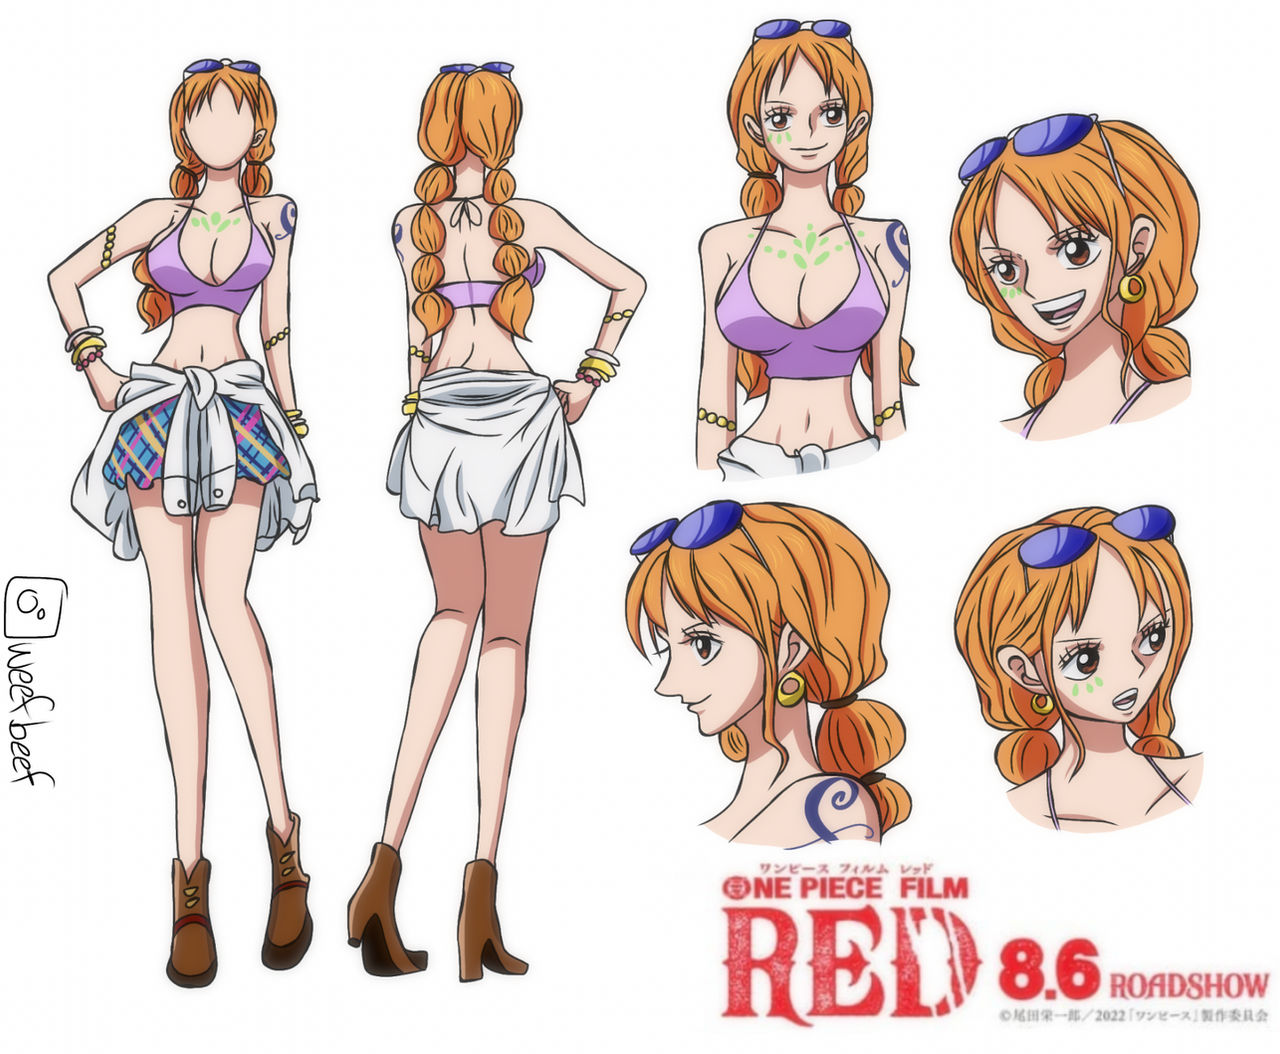 Nami - One Piece ep 1020 by Berg-anime on DeviantArt